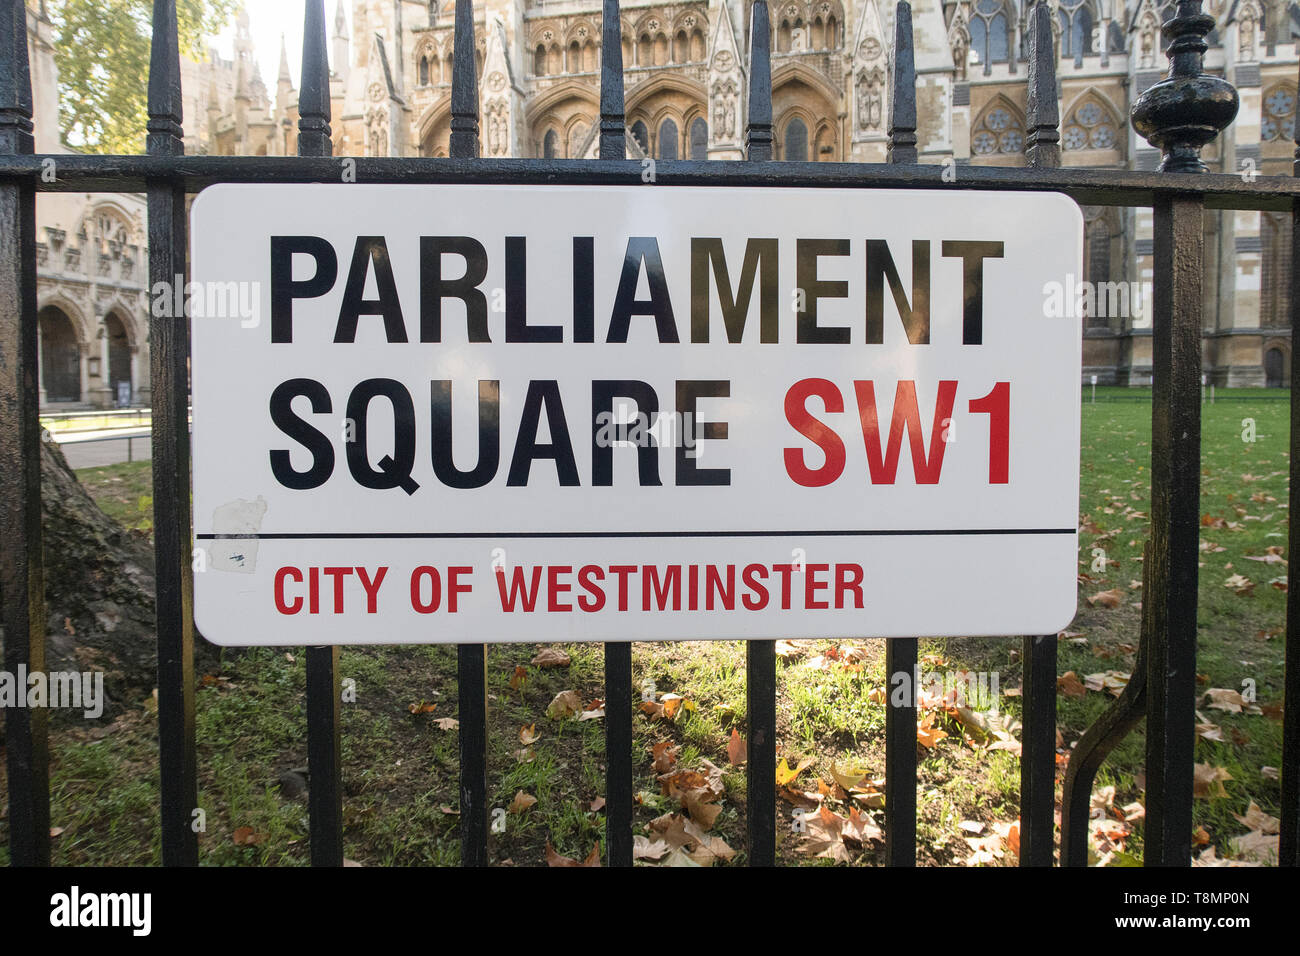 London, United Kingdom - 11 October 2018; Parliament Square street sign in London, in front of the Westminster Abbey a populair tourist location Stock Photo